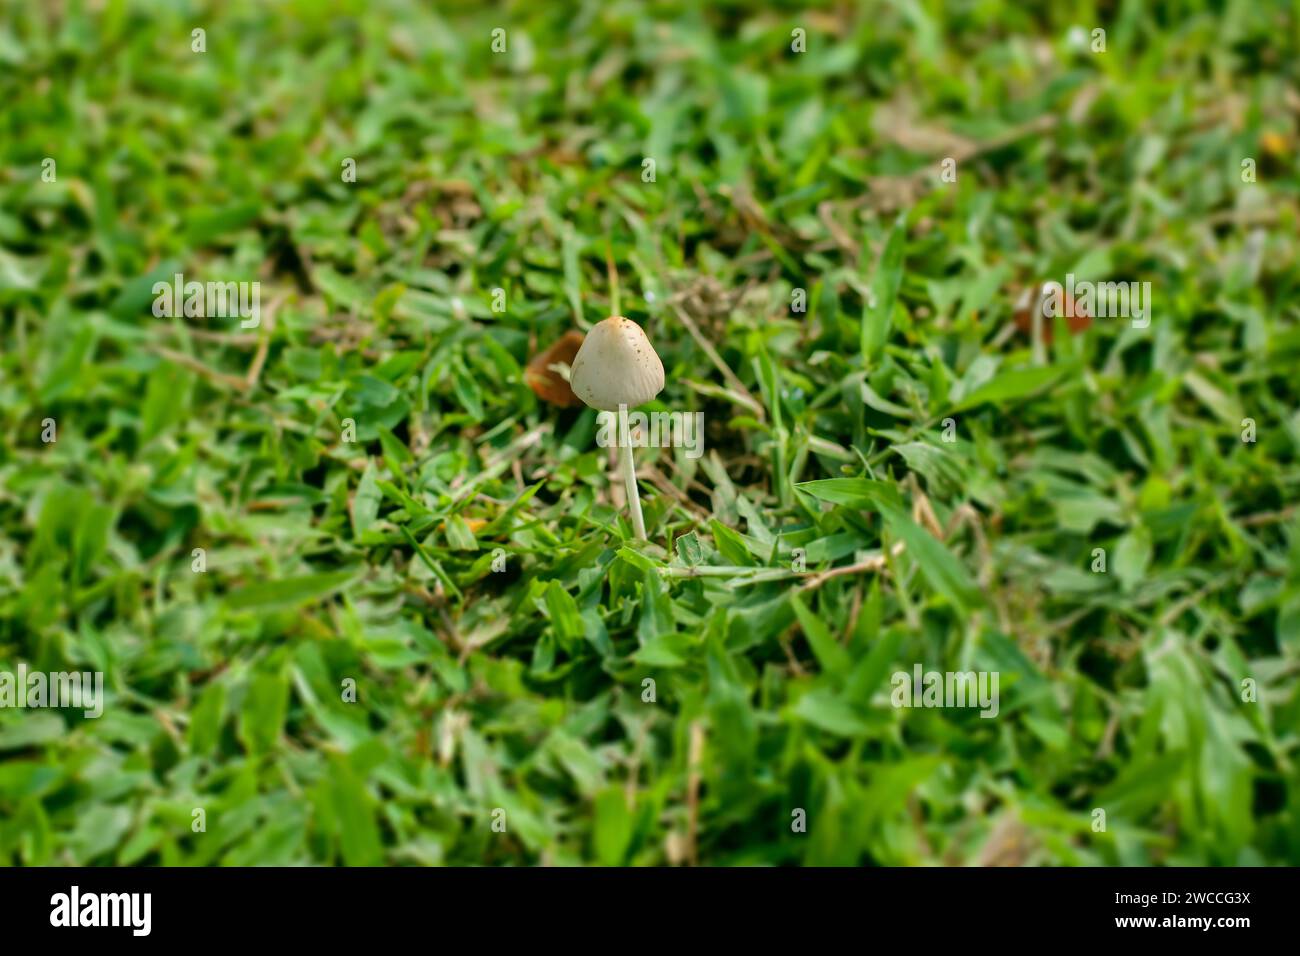 Small Mushroom Emerging From Lush Green Grass in a Natural Daylight Setting Stock Photo